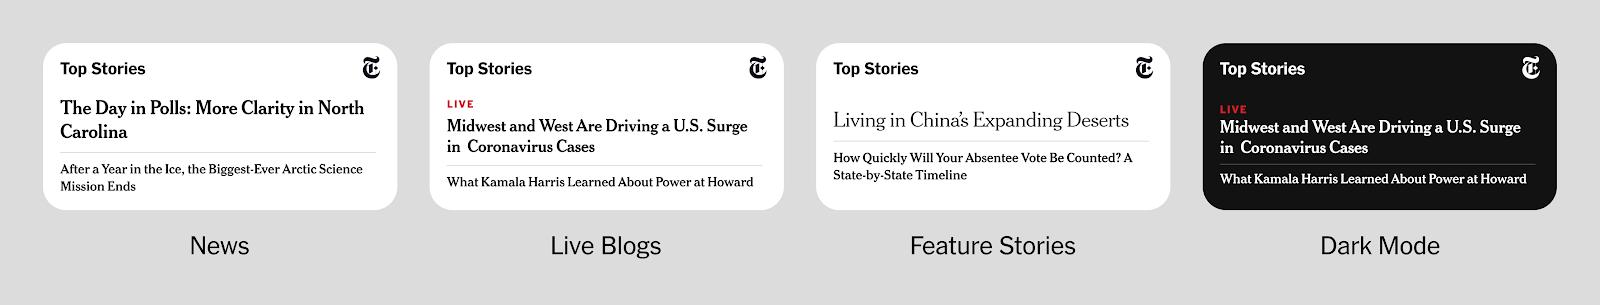 The New York Times Widget Accessibility